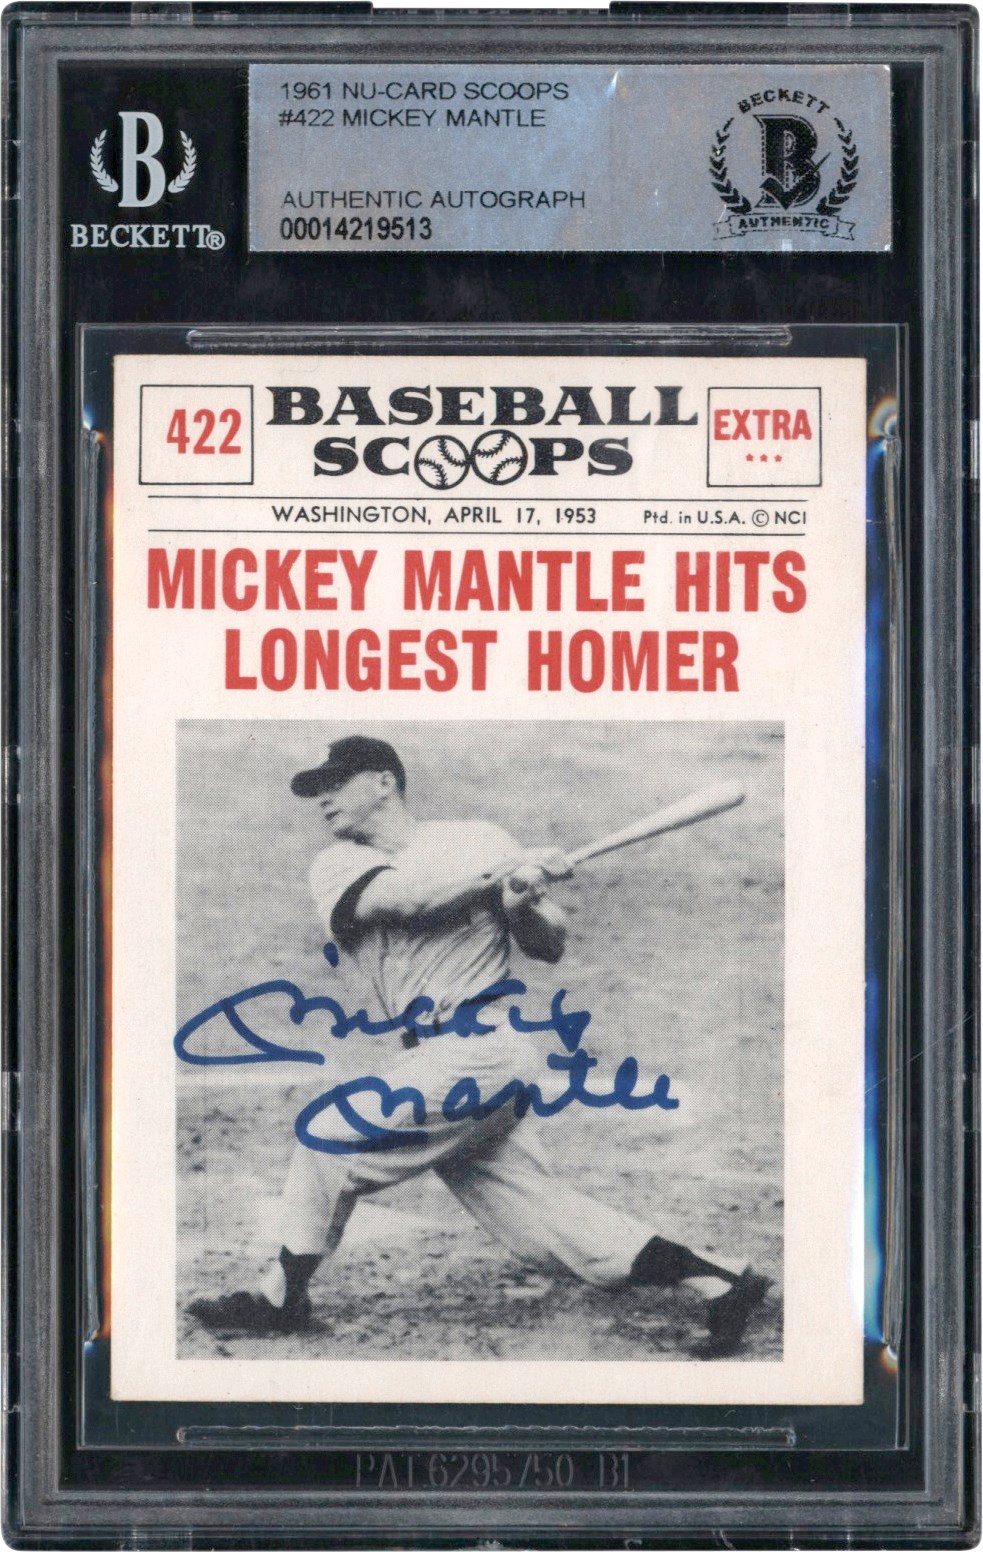 - Signed 1961 Nu-Card Scoops #422 Mickey Mantle Beckett (BAS)